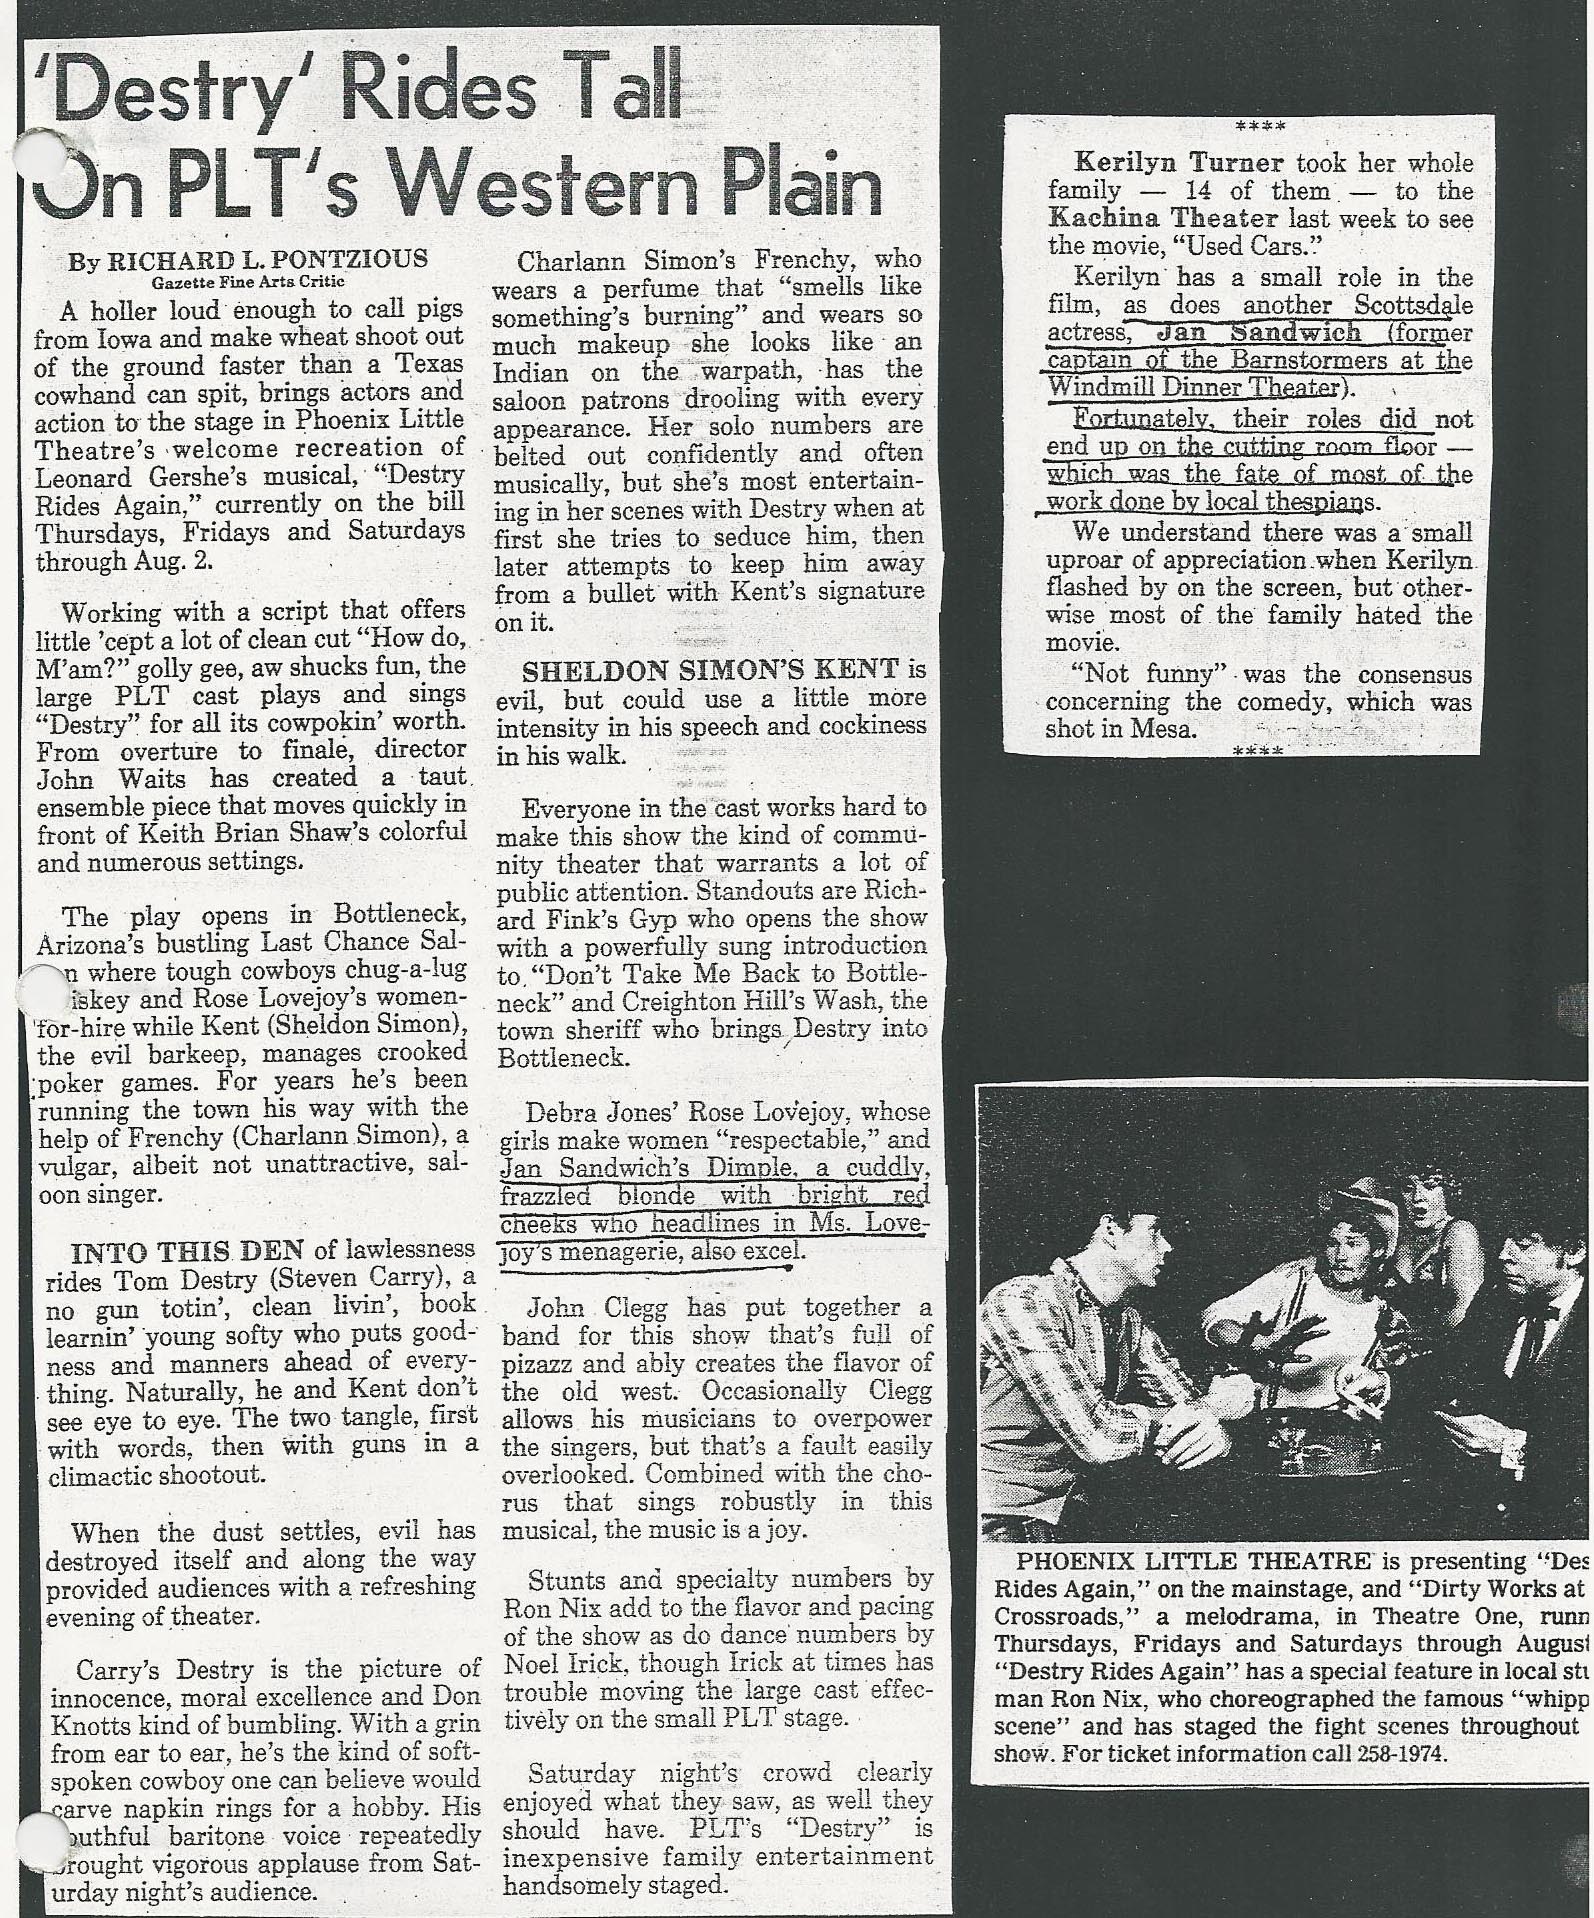 "Destry Rides Again" was produced at Phoenix Little Theatre in 1980 (?) Clippings from the collection of Jan Sandwich.